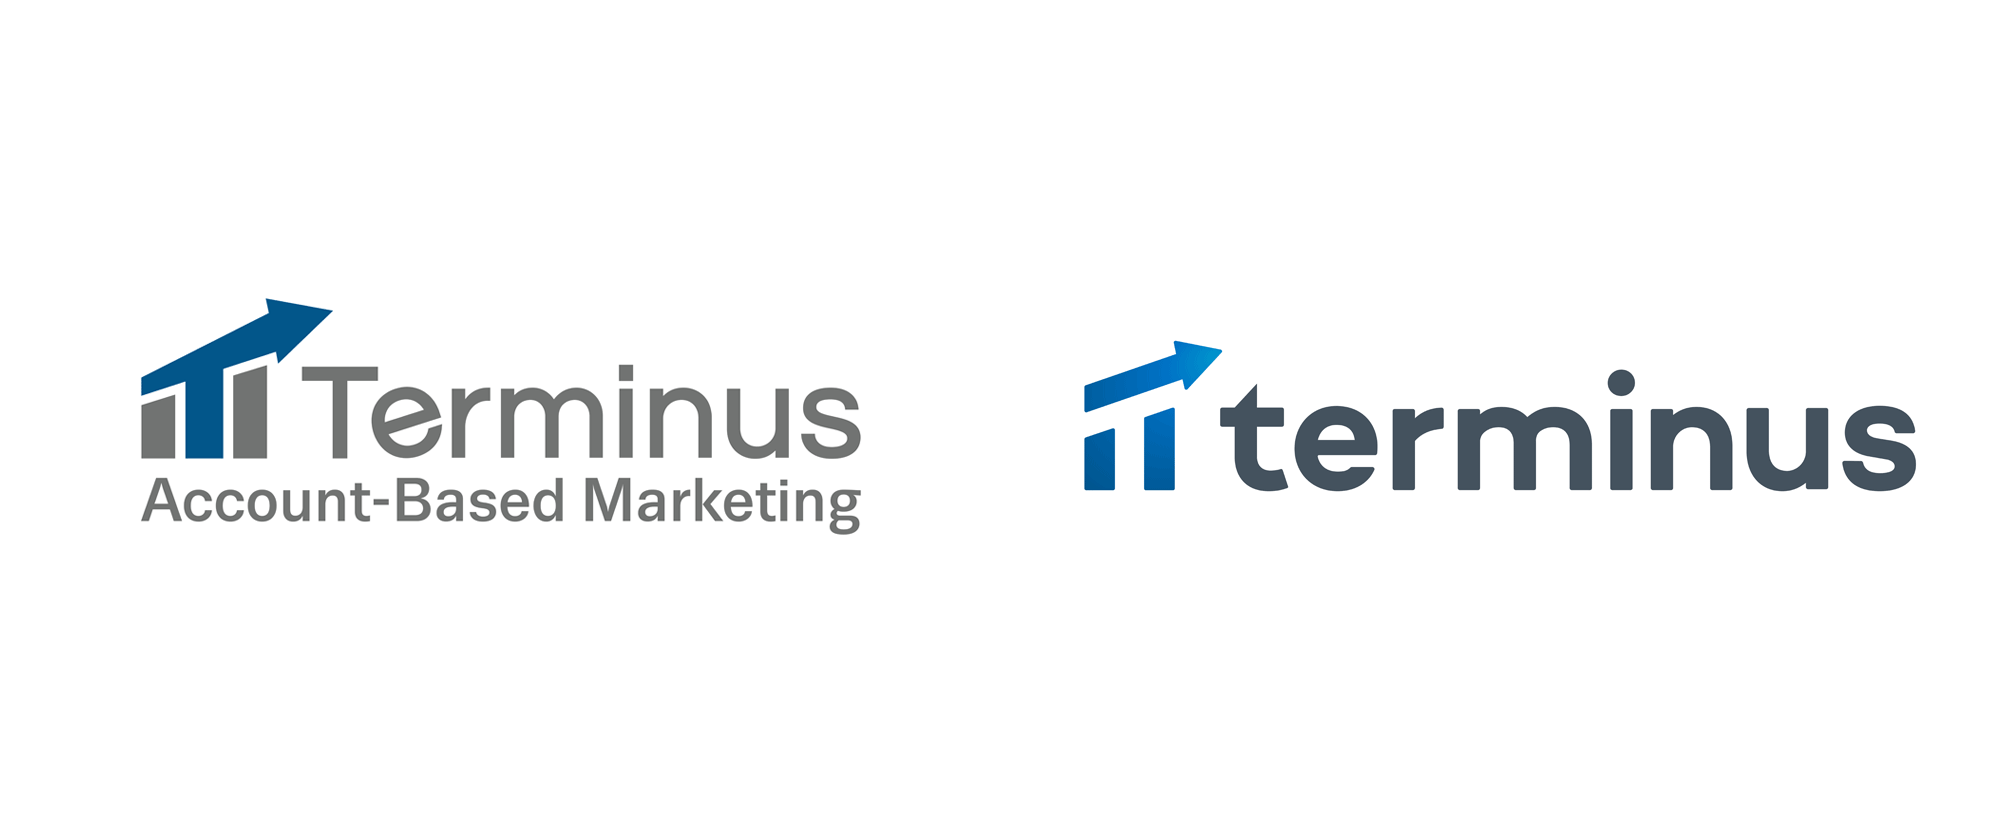 New Logo and Identity for Terminus Done In-house